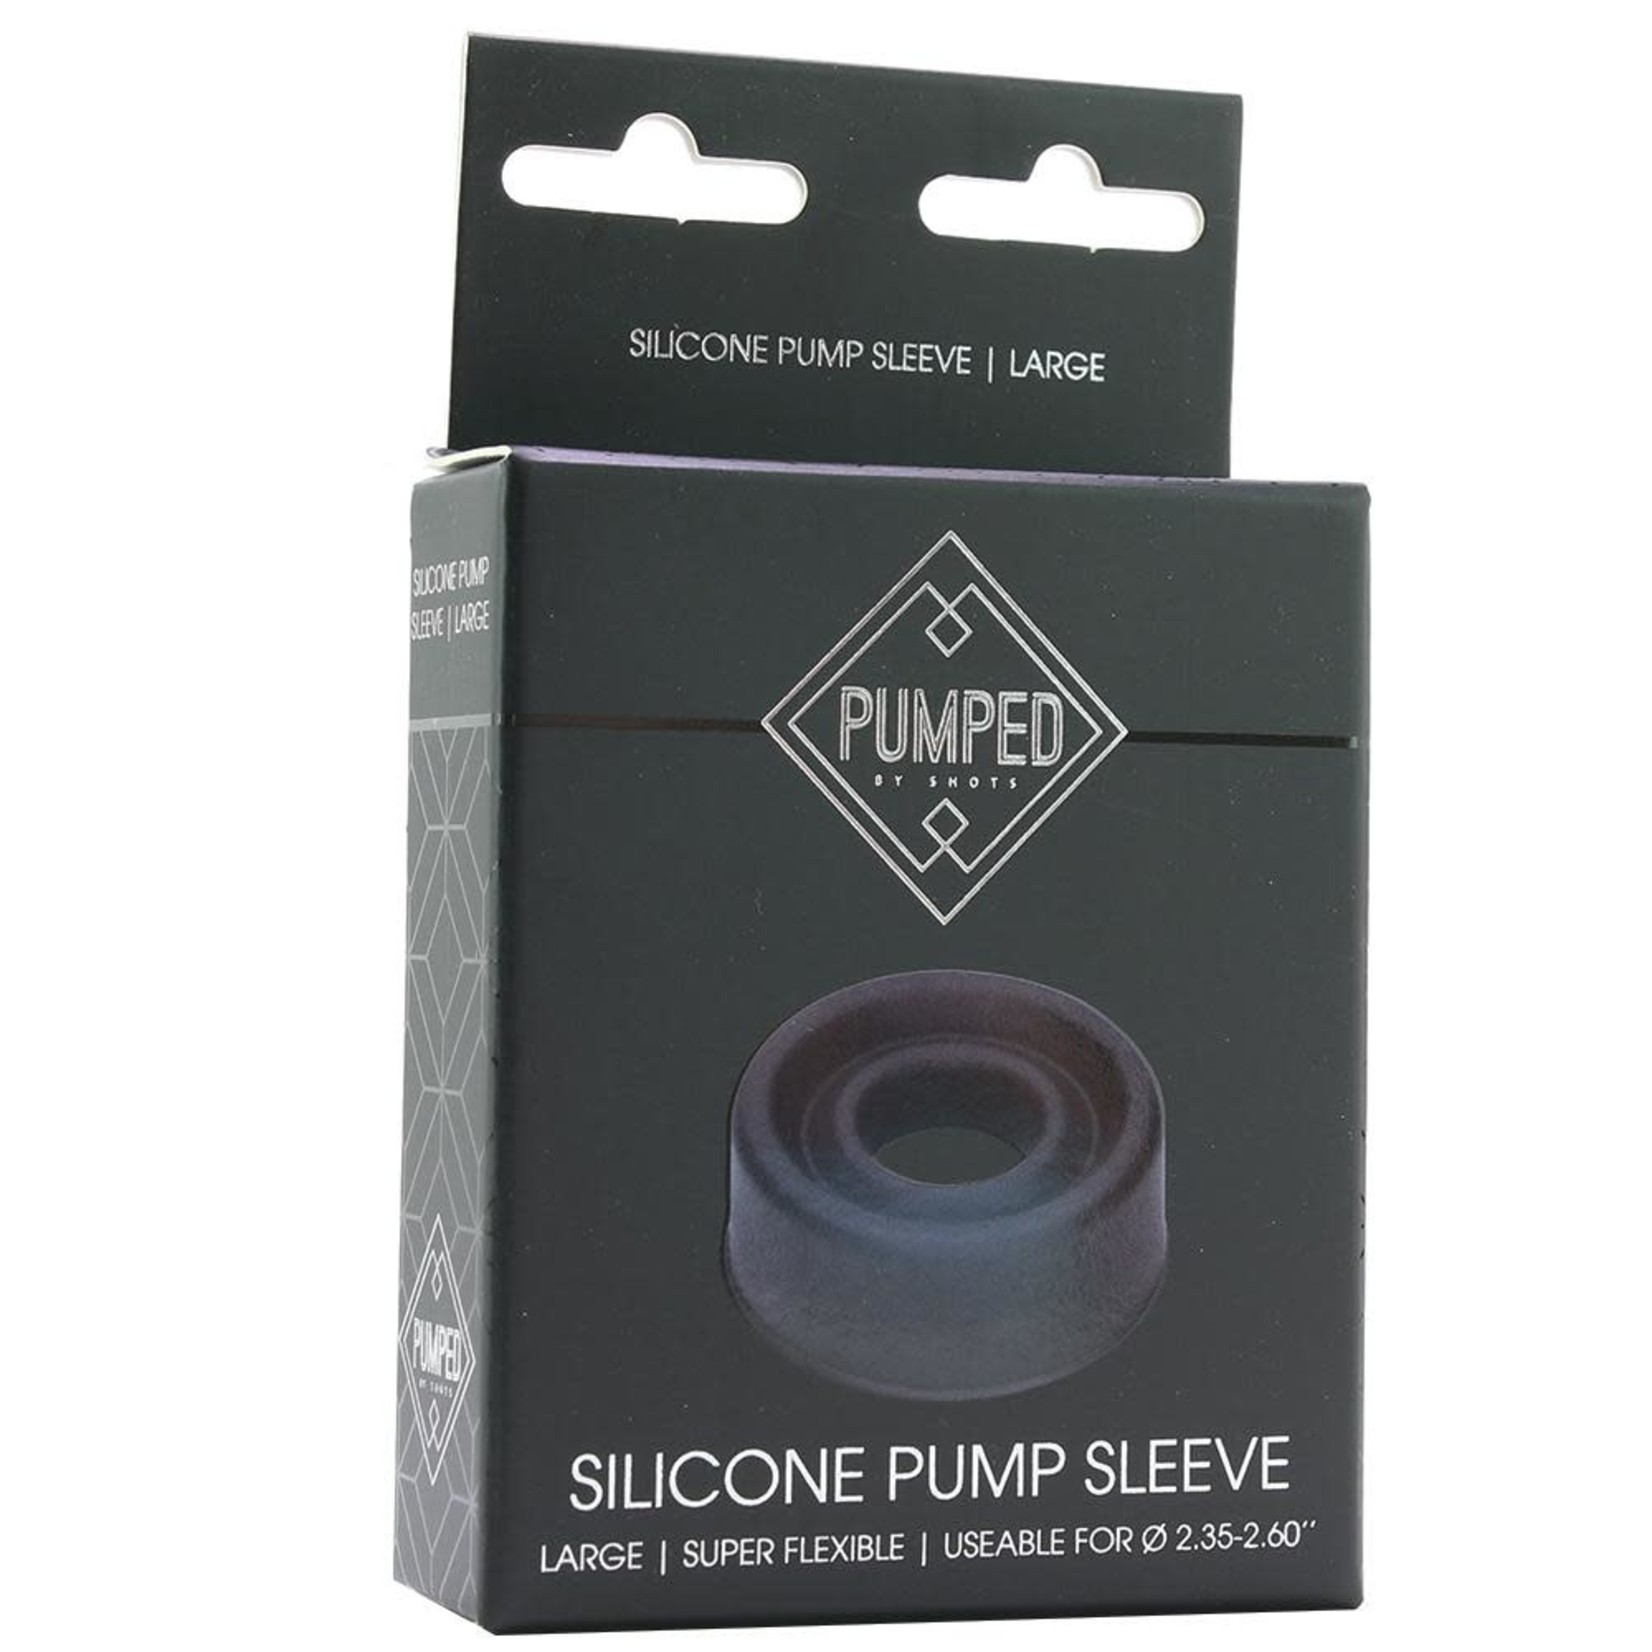 SHOTS PUMPED - SILICONE PUMP SLEEVE - LARGE